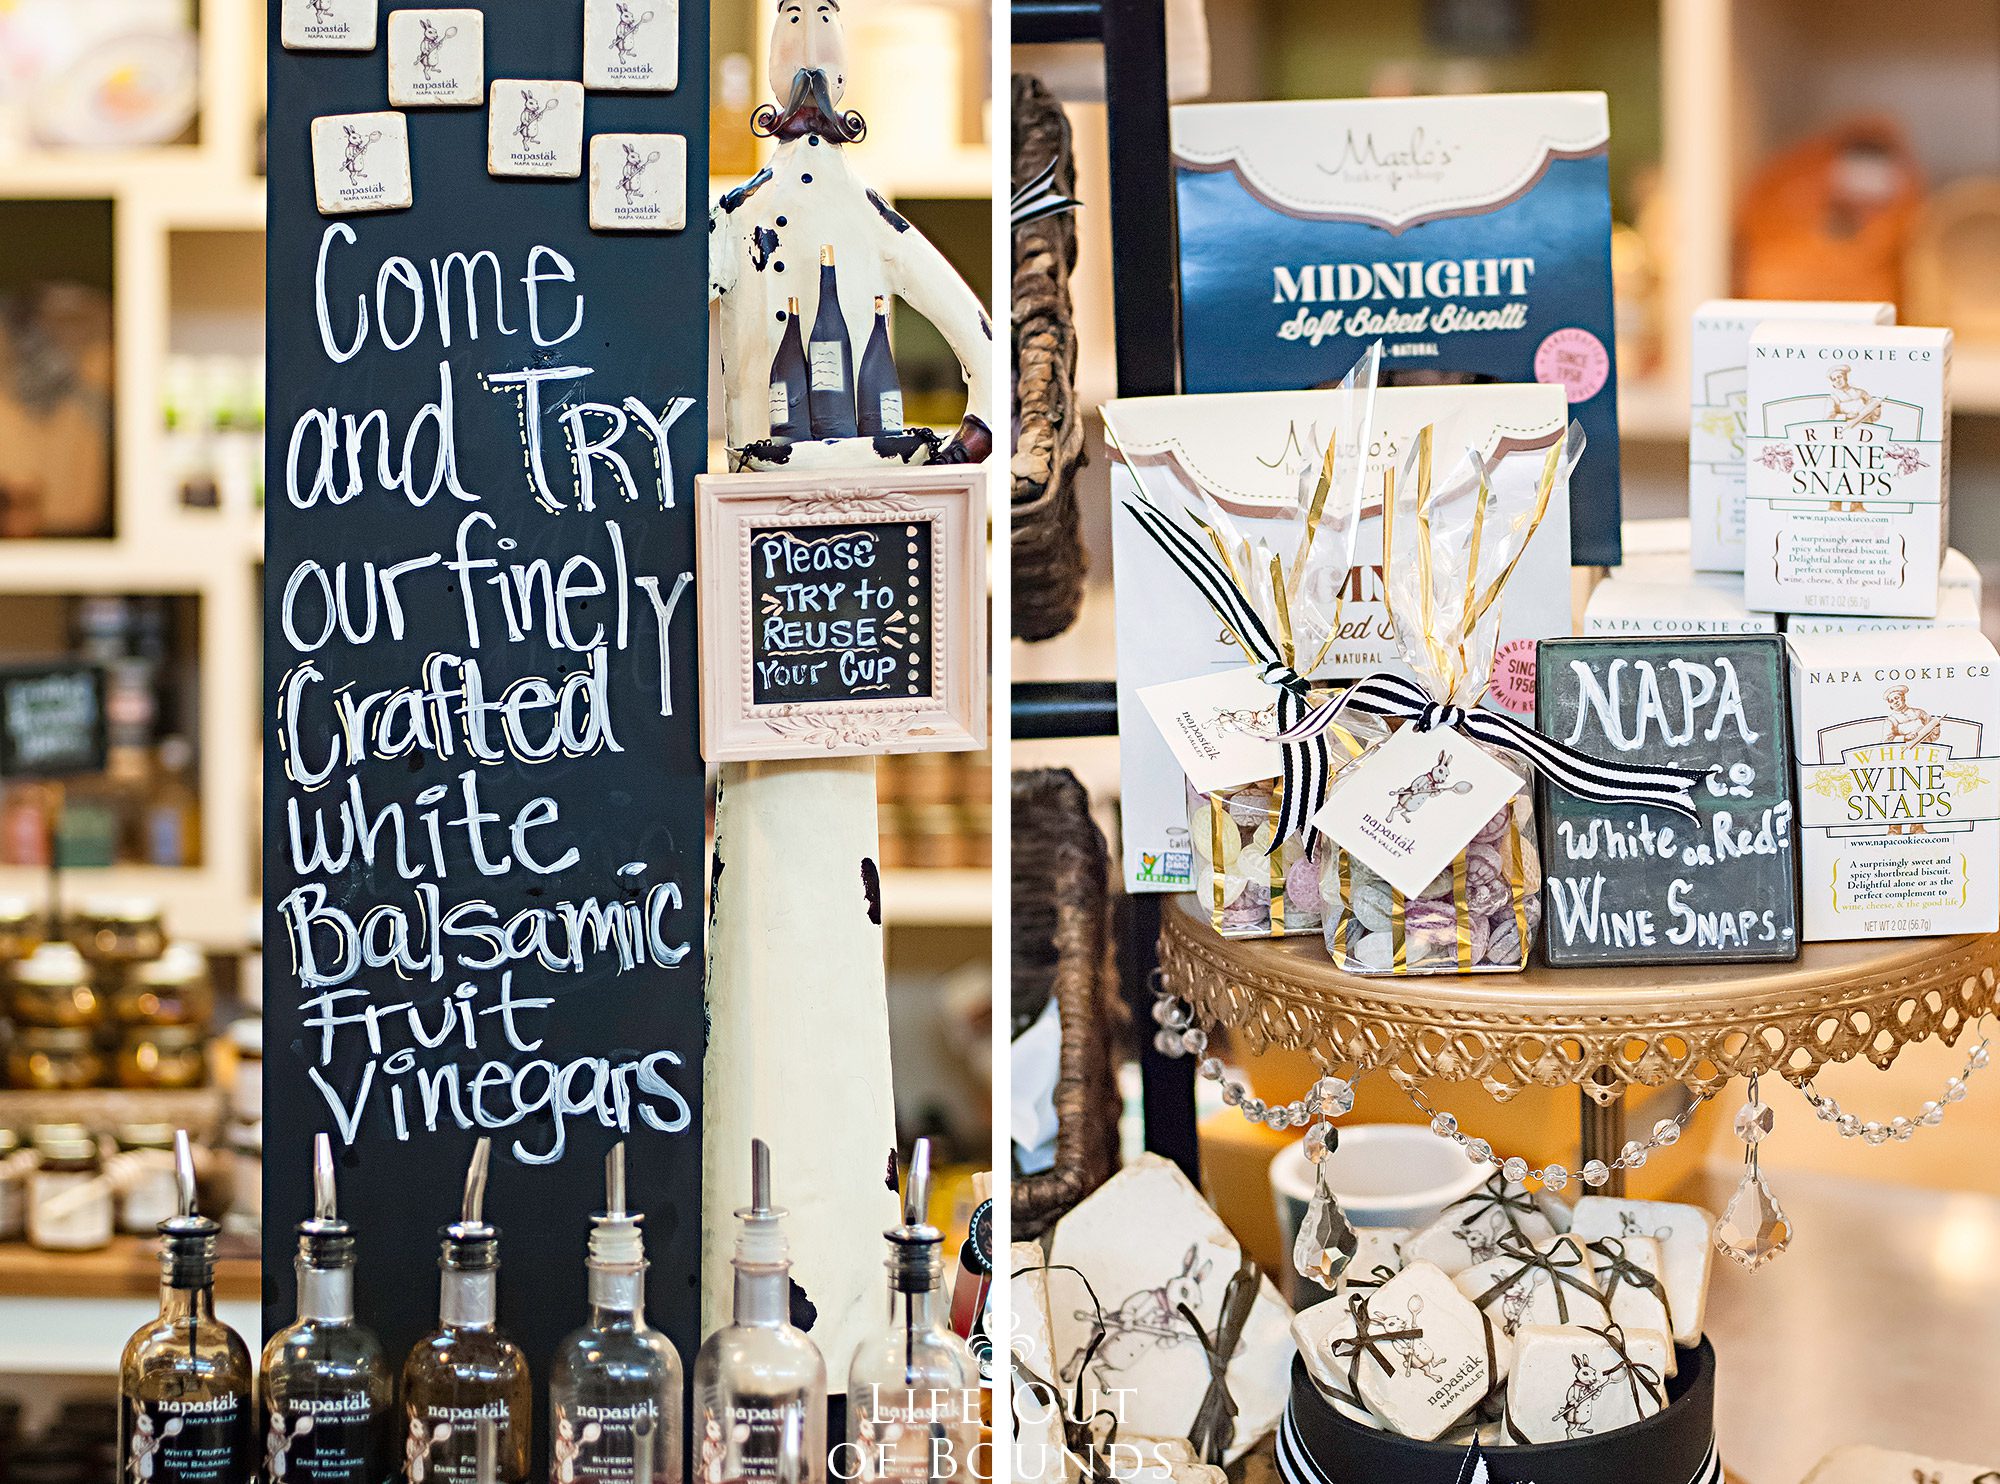 Gourmet-foods-and-beverages-at-Oxbow-Public-Market-Napa-California